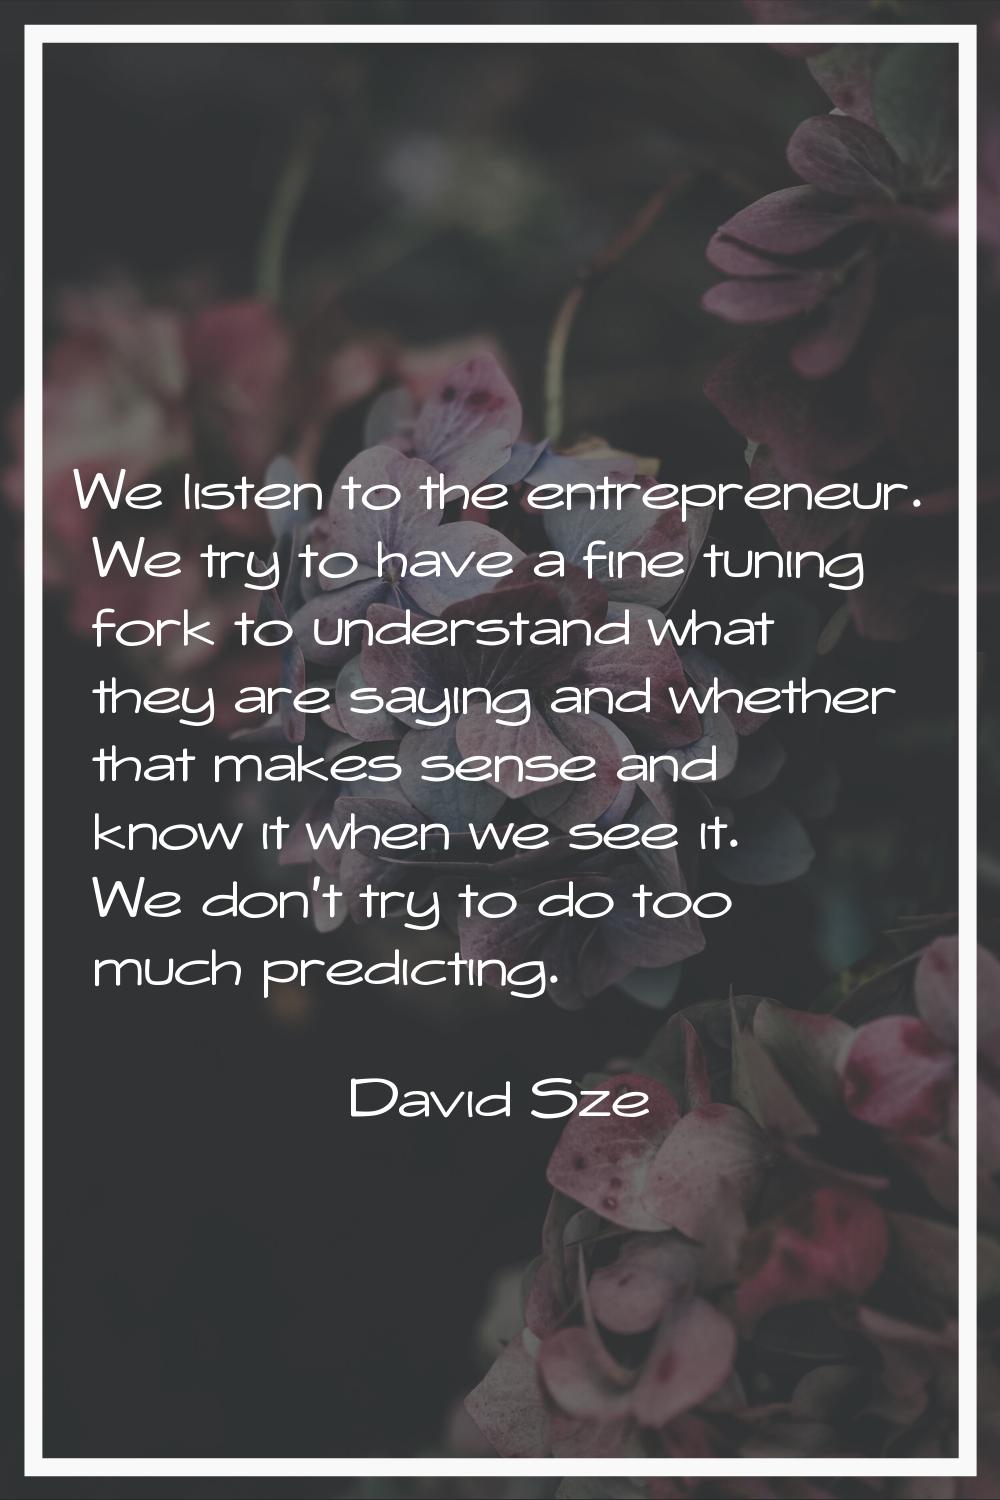 We listen to the entrepreneur. We try to have a fine tuning fork to understand what they are saying